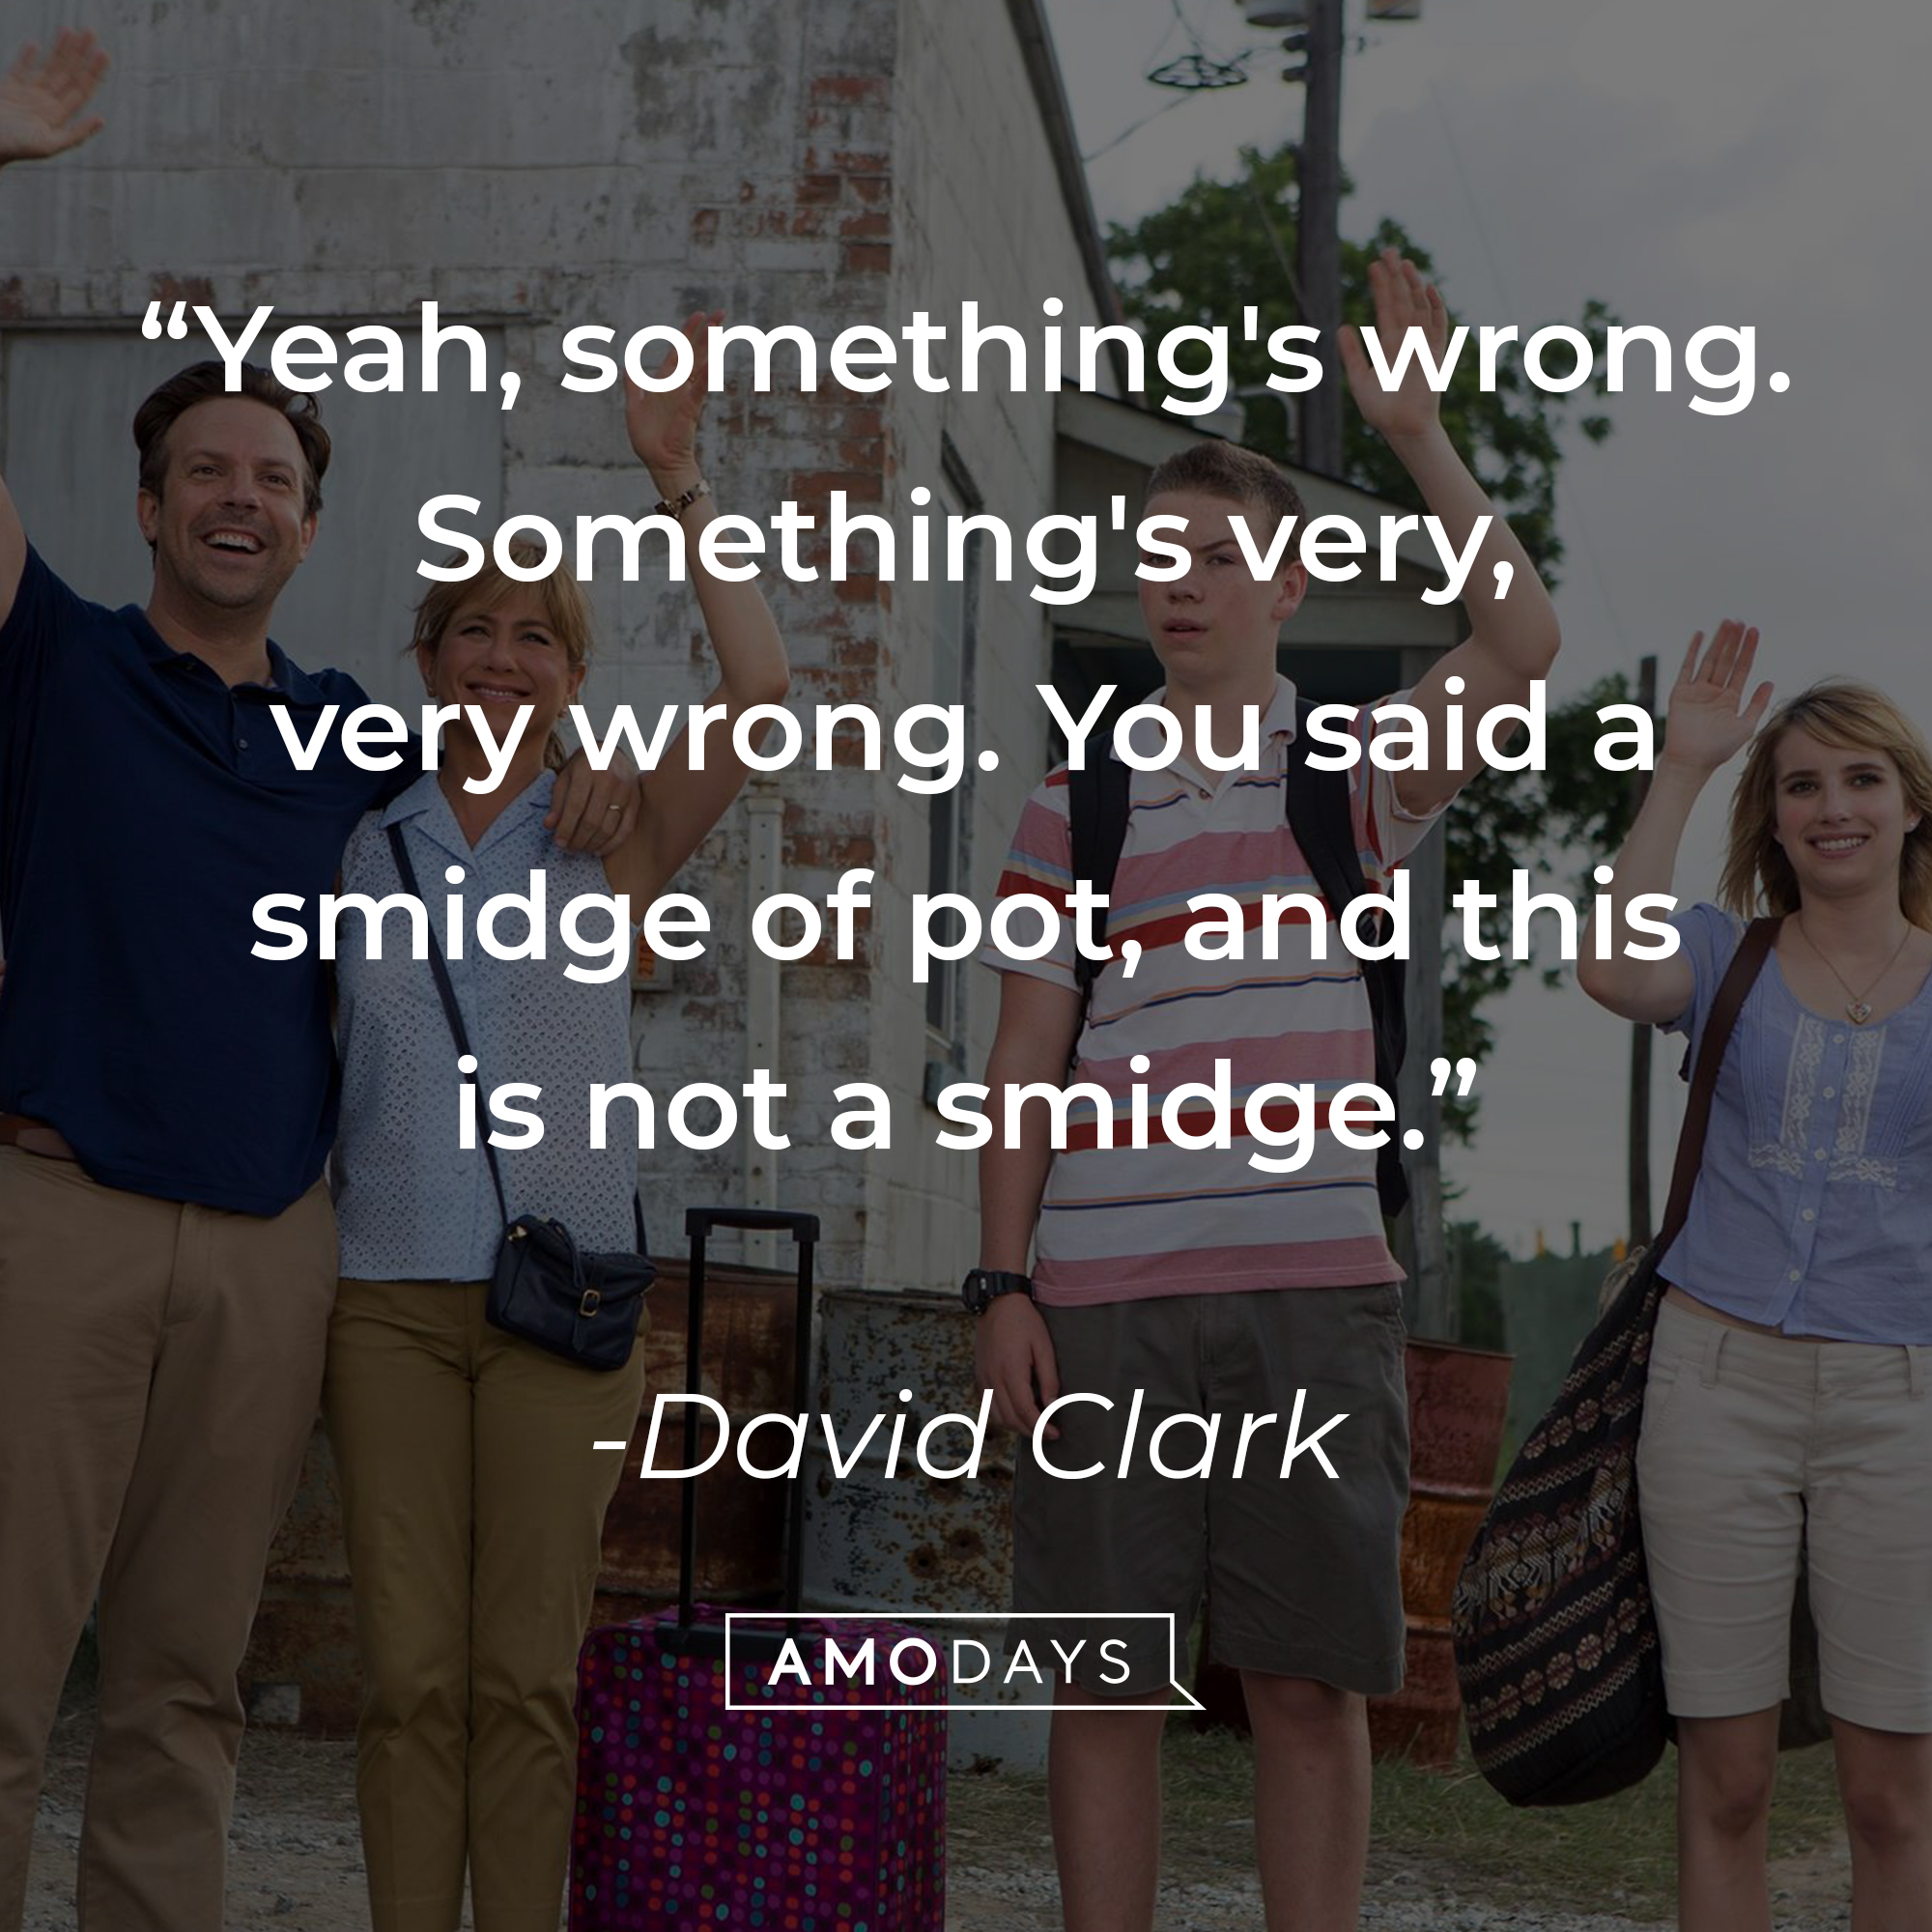 David Clark's quote: “Yeah, something's wrong. Something's very, very wrong. You said a smidge of pot, and this is not a smidge.” | Source: facebook.com/WereTheMillersUK